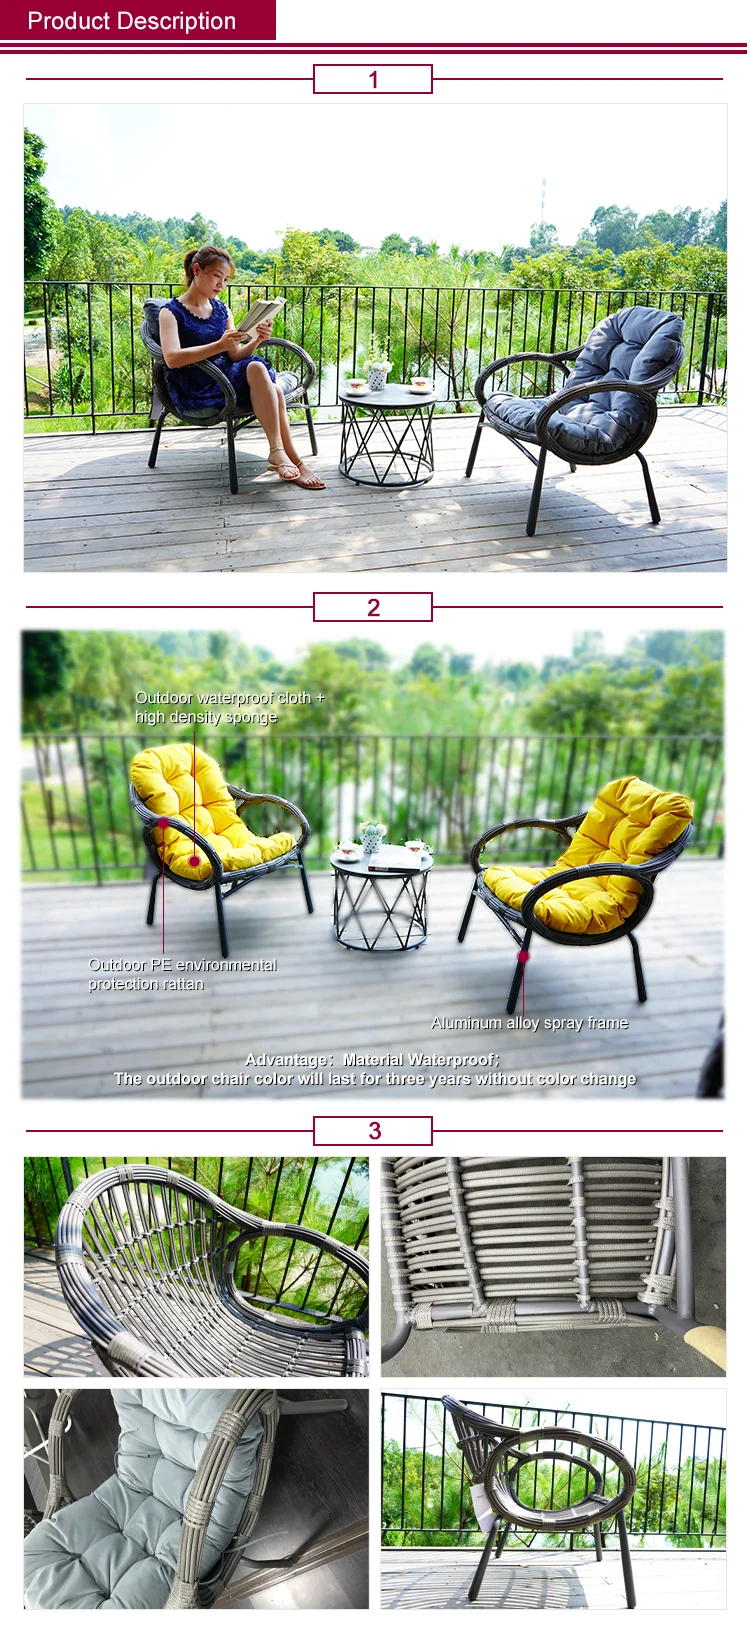 Outdoor Leisure Chair for Garden Frontgate or Balcony Courtyard Usage PE Environmental Protection Dining Chair of Dining Set